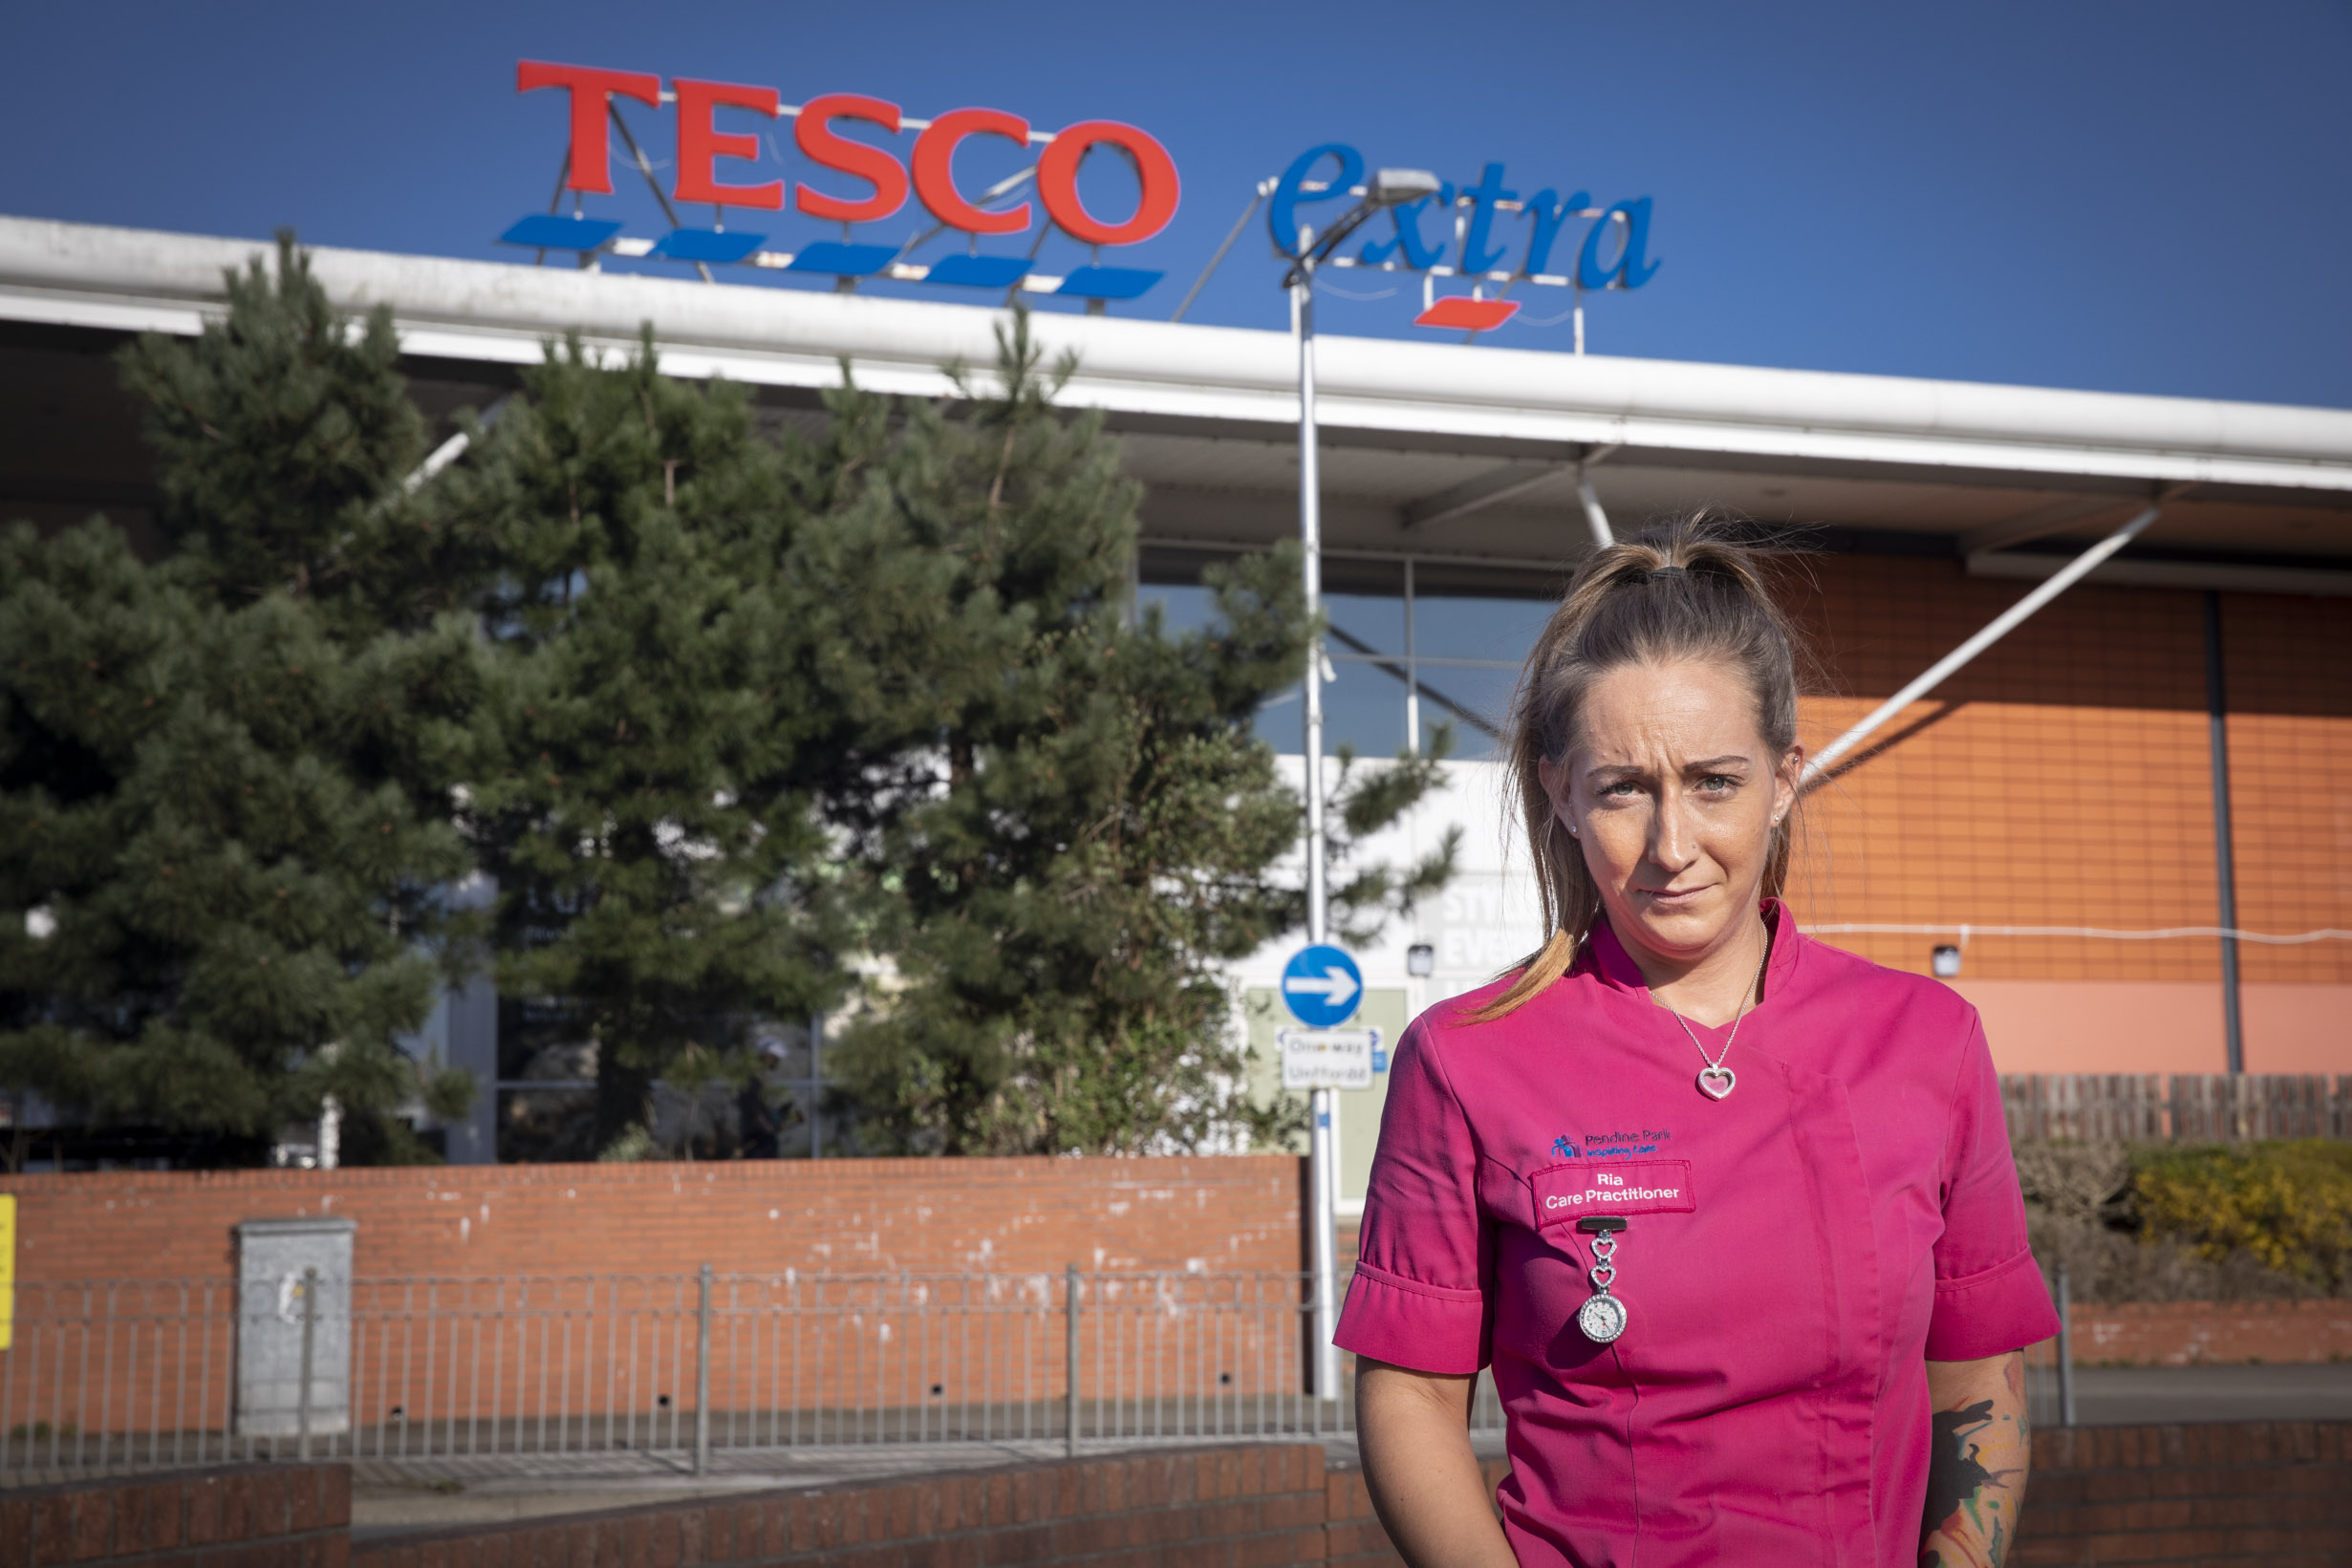 Asda come to rescue of care home staff after Tesco ban